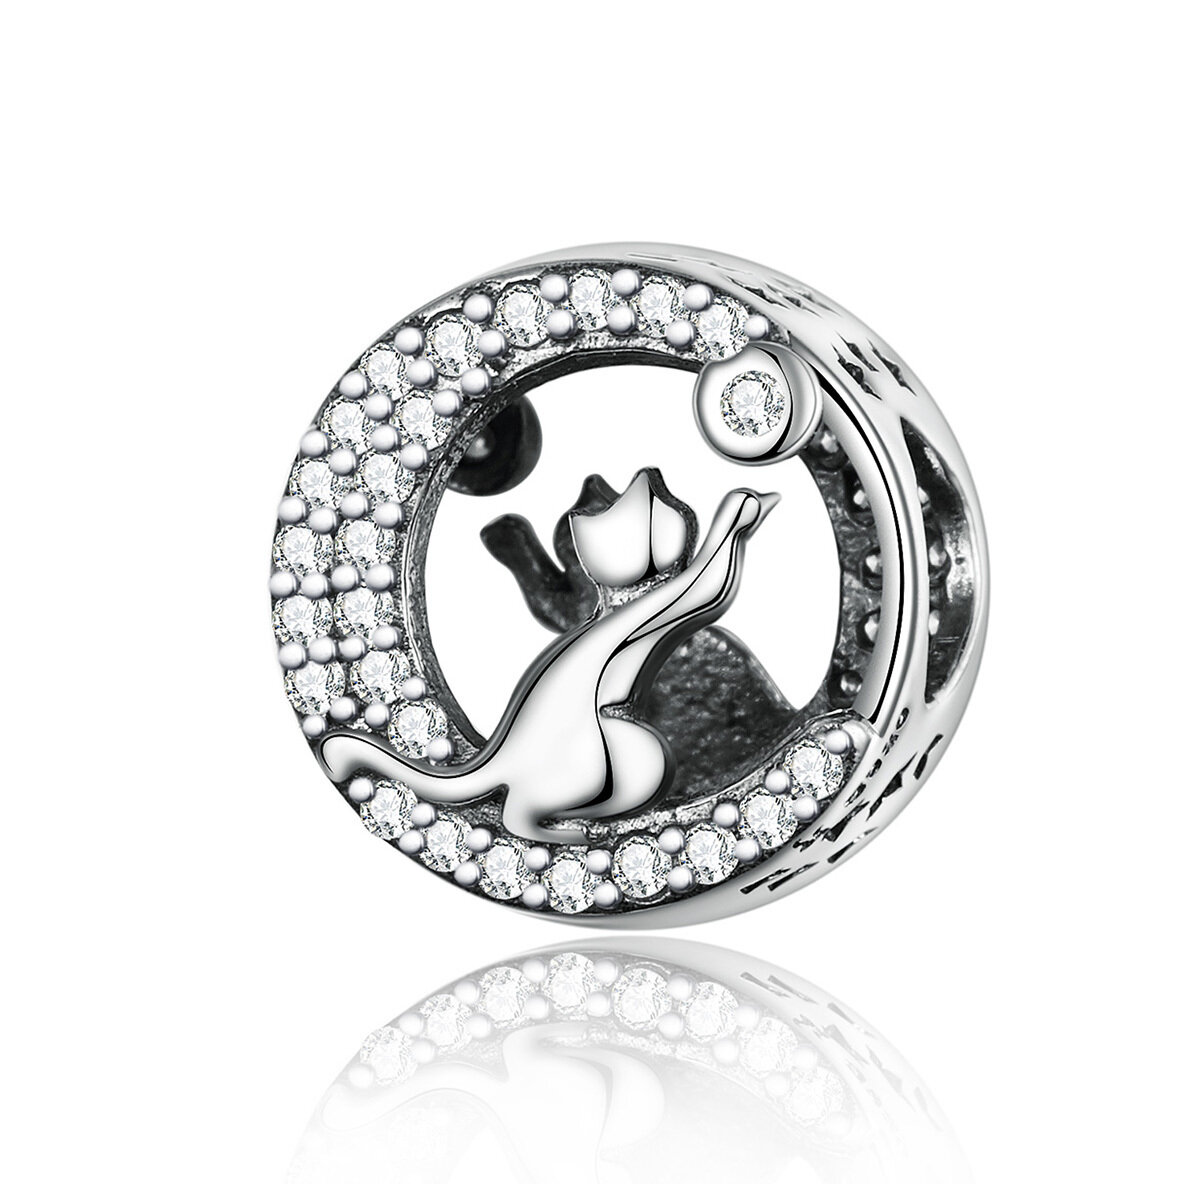 GemKing SCC1203 Happy Kitty S925 Sterling Silver Charm